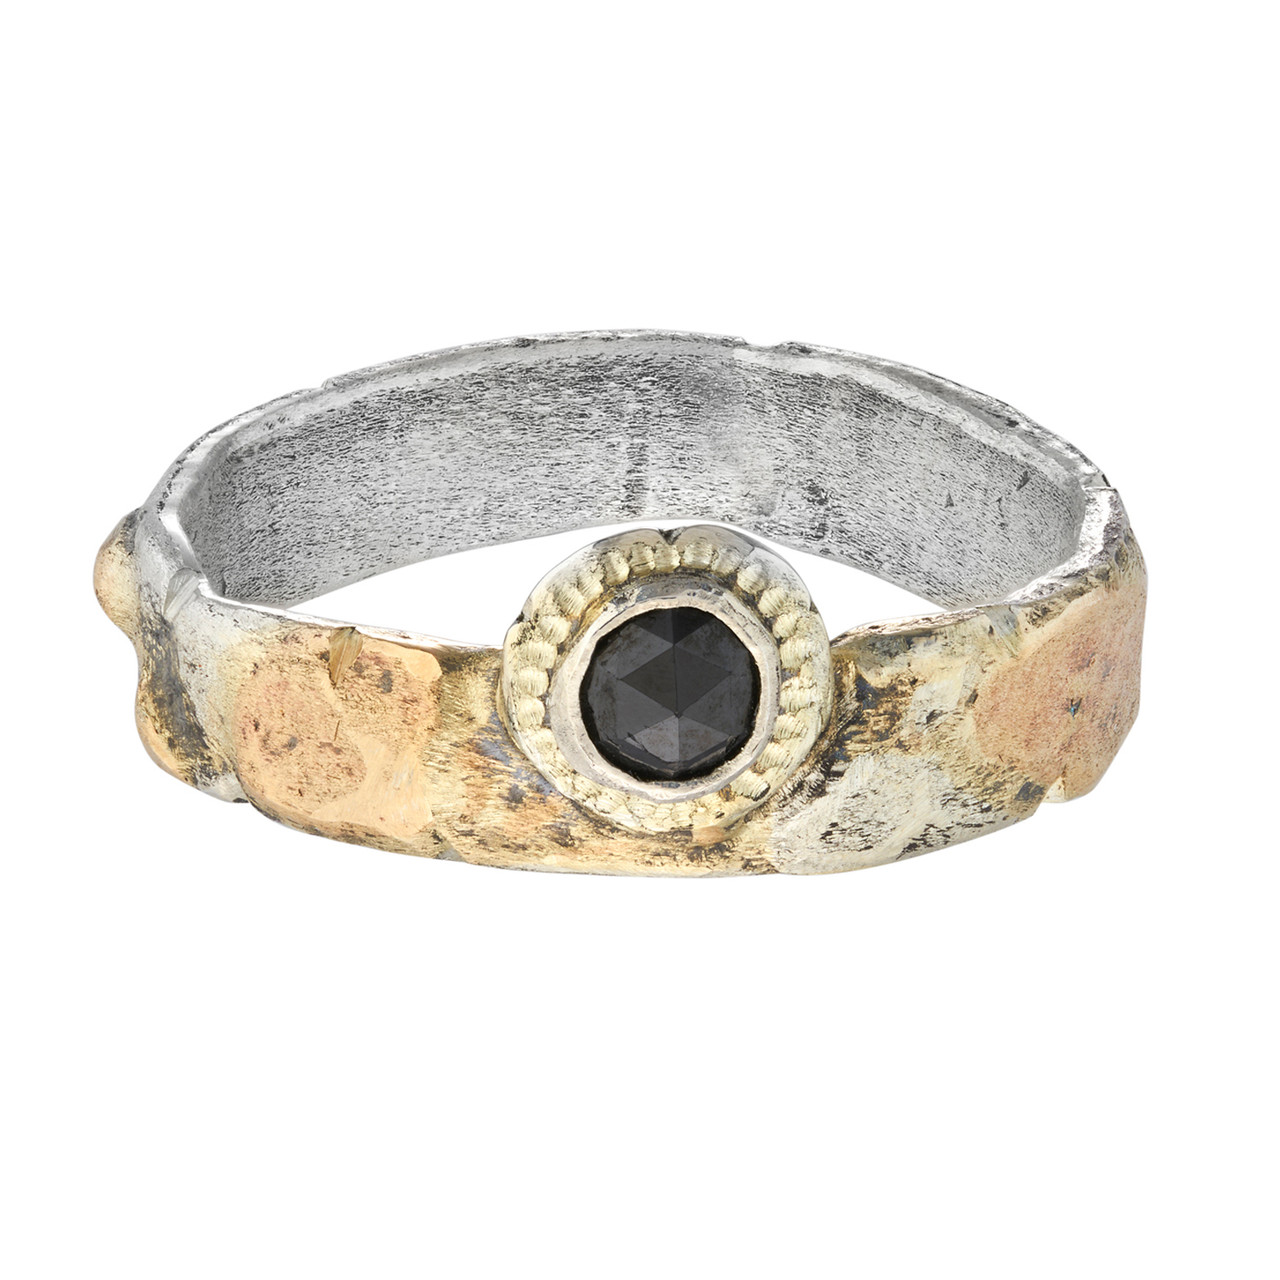 "On The Edge Of Love" Ring with Black Diamond & 14ct Yellow Gold, Franny E, tomfoolery